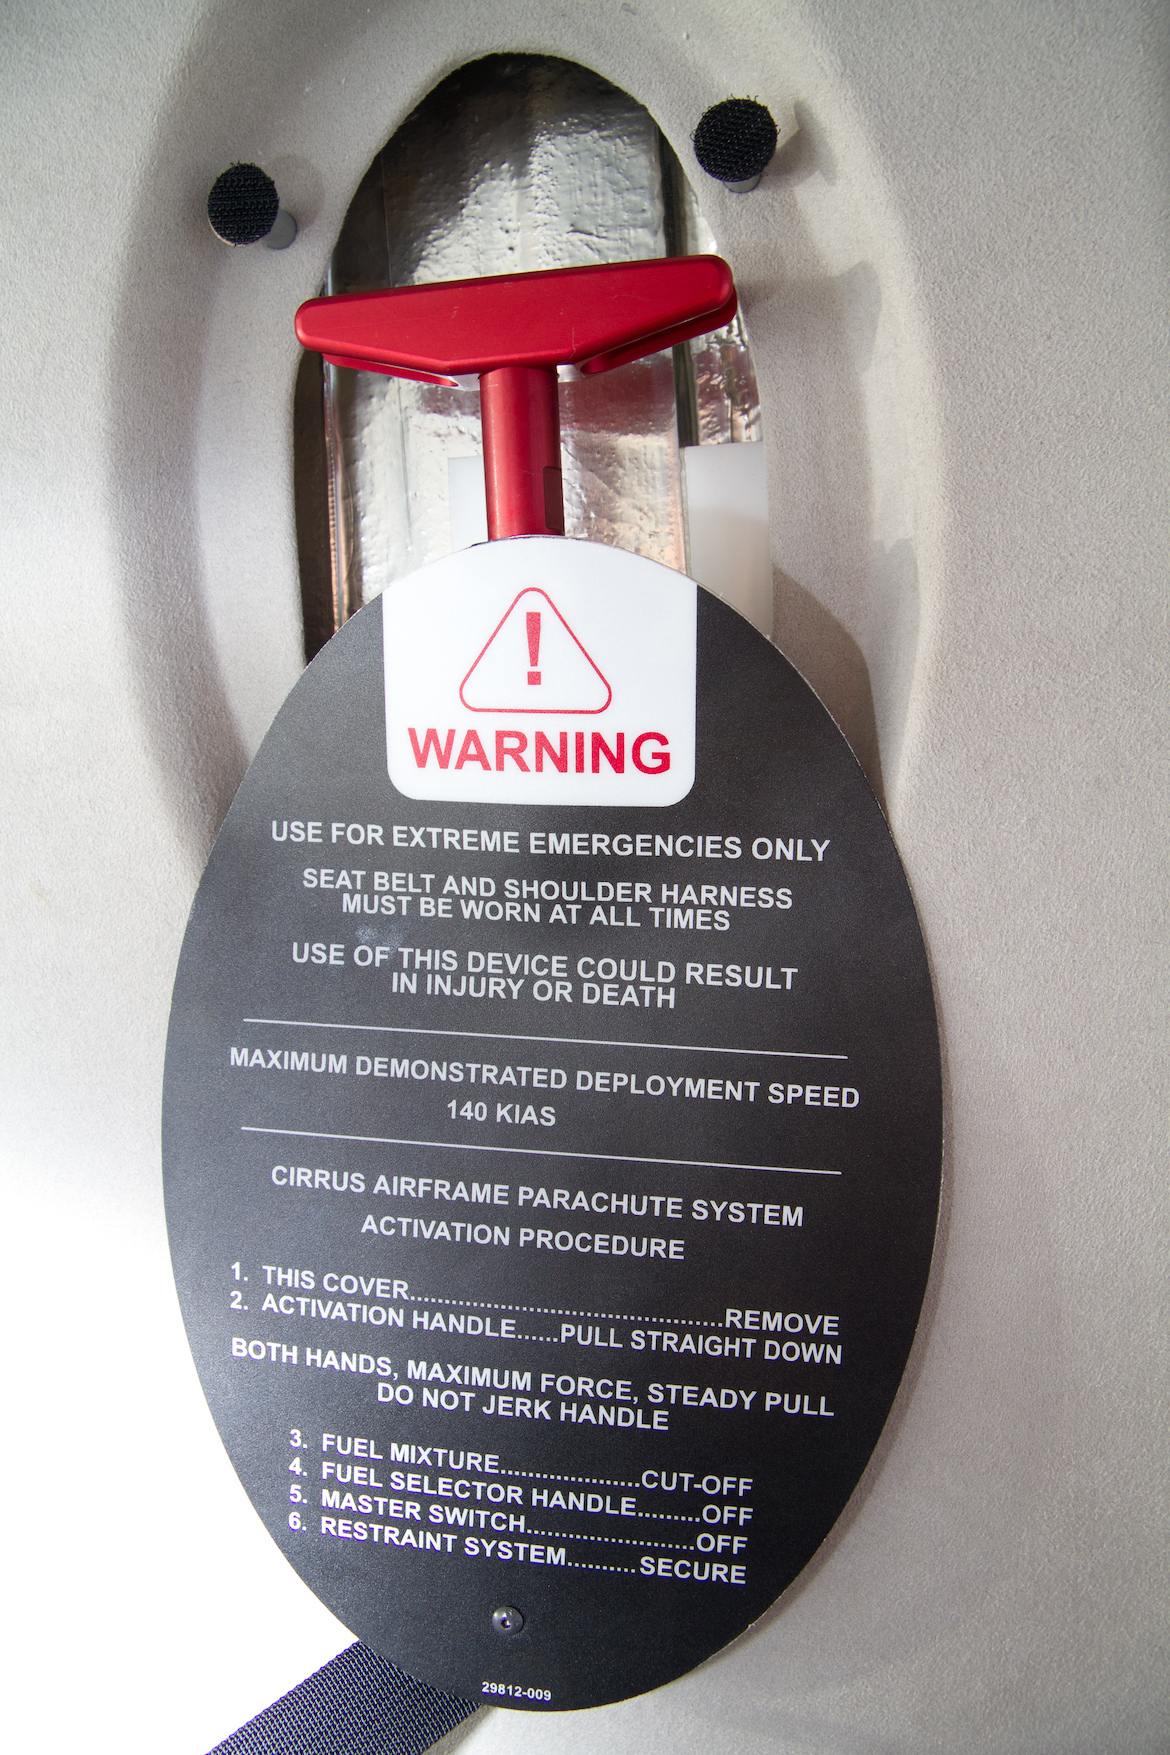 As the sign says, use only in the case of extreme emergencies. (Seth Jaworski)